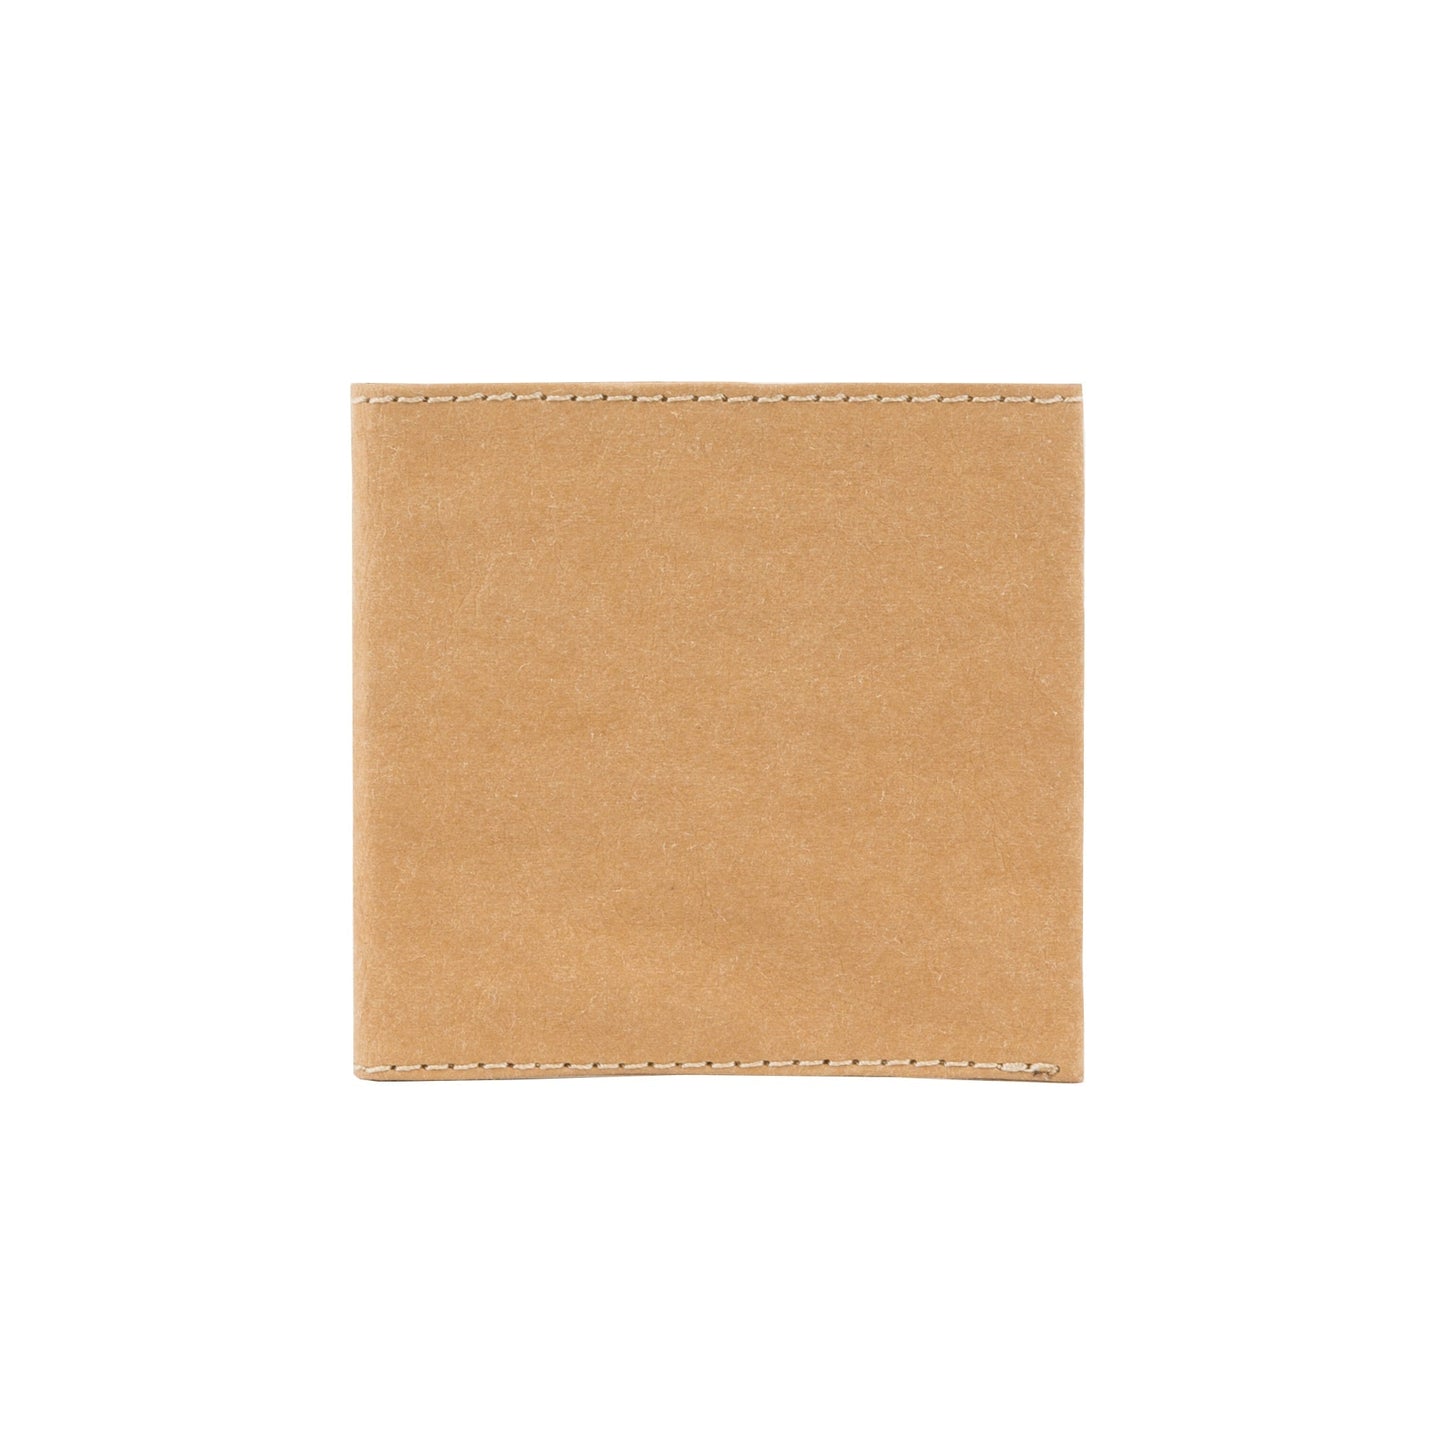 The outside of a small 8 slot washable paper wallet is shown. The wallet is closed and is tan.